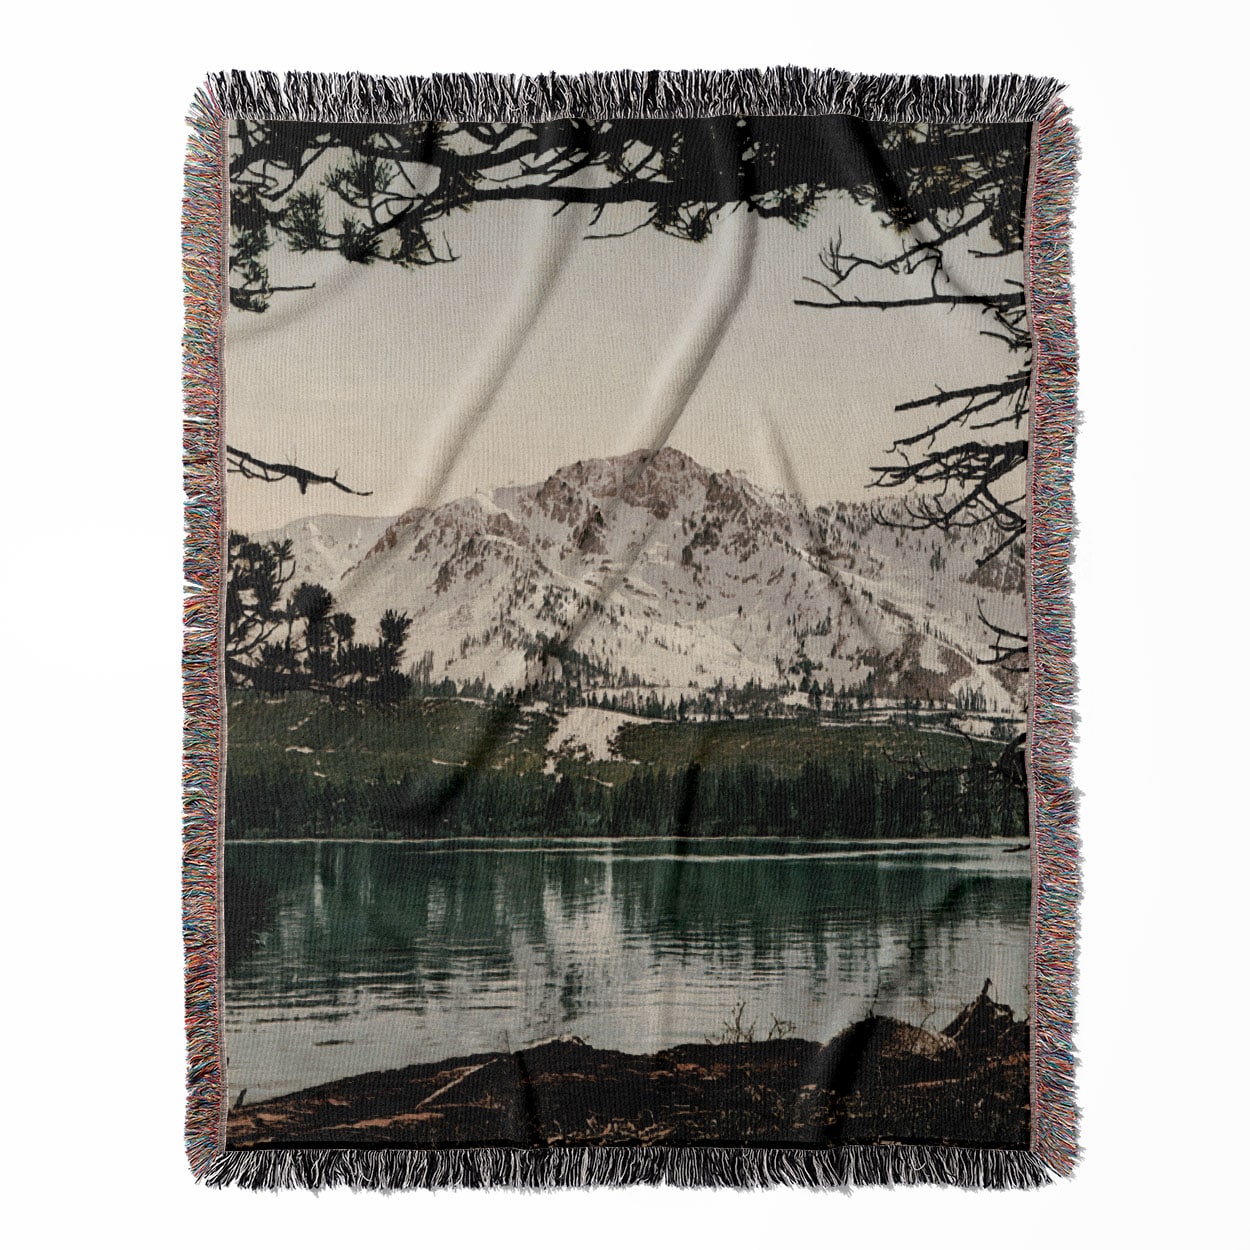 Snowy Mountains woven throw blanket, crafted from 100% cotton, offering a soft and cozy texture with a Mt. Tallac theme for home decor.